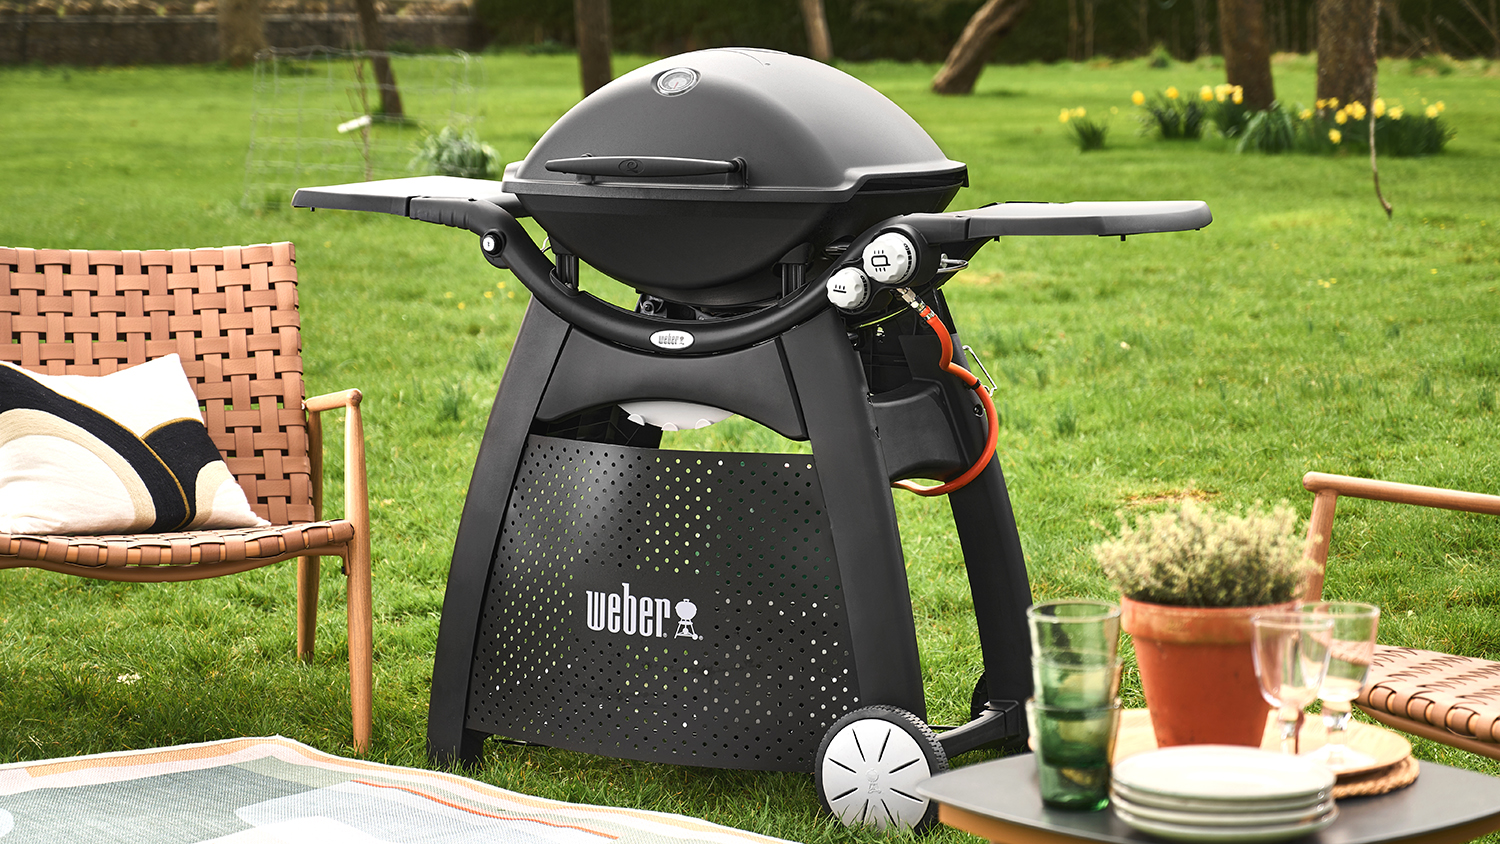 bandage Inspirere Hovedgade Weber Q 3200 gas grill review - perfect for small backyards | Livingetc